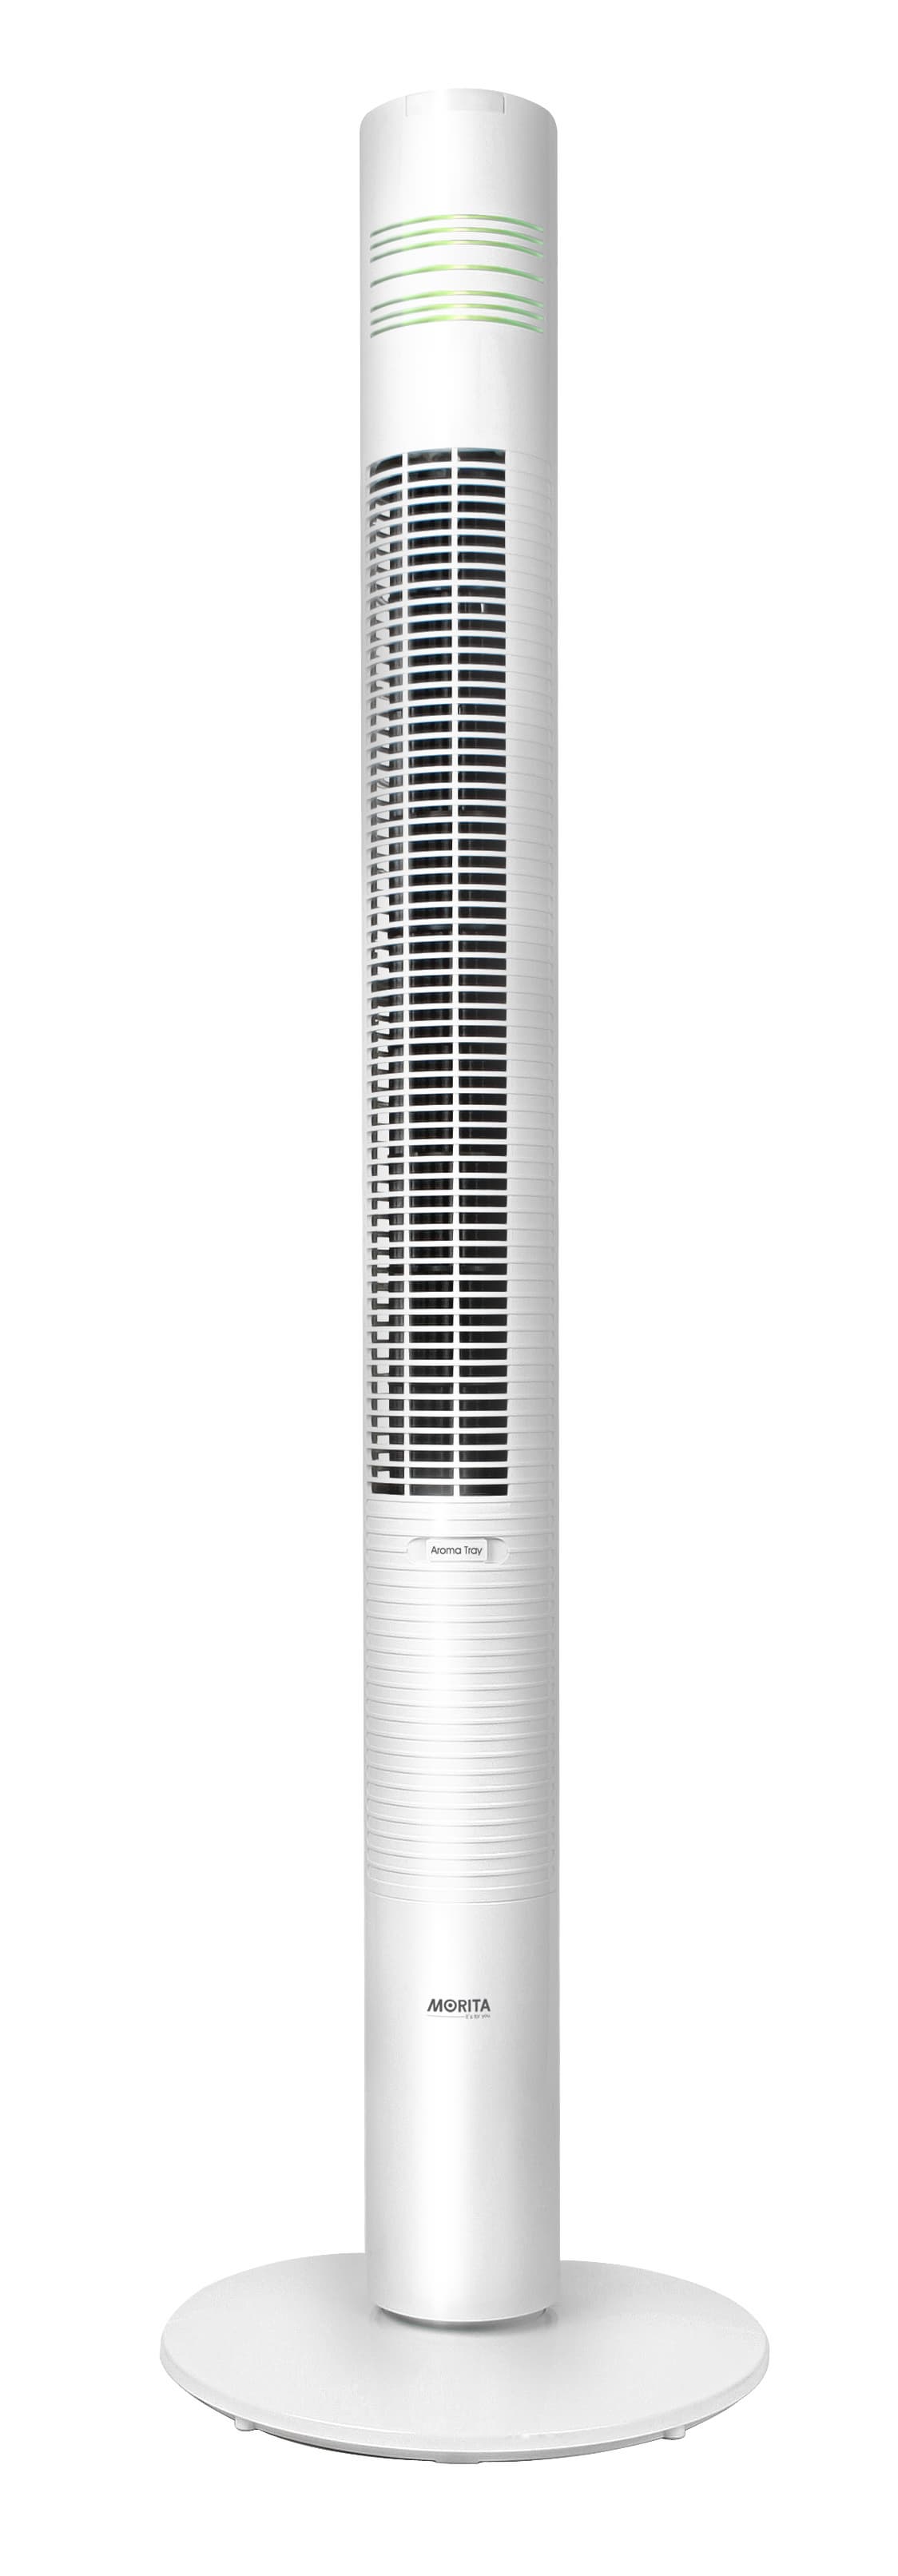 Tower Fan, 3 Speeds, Resonable Price, Remote